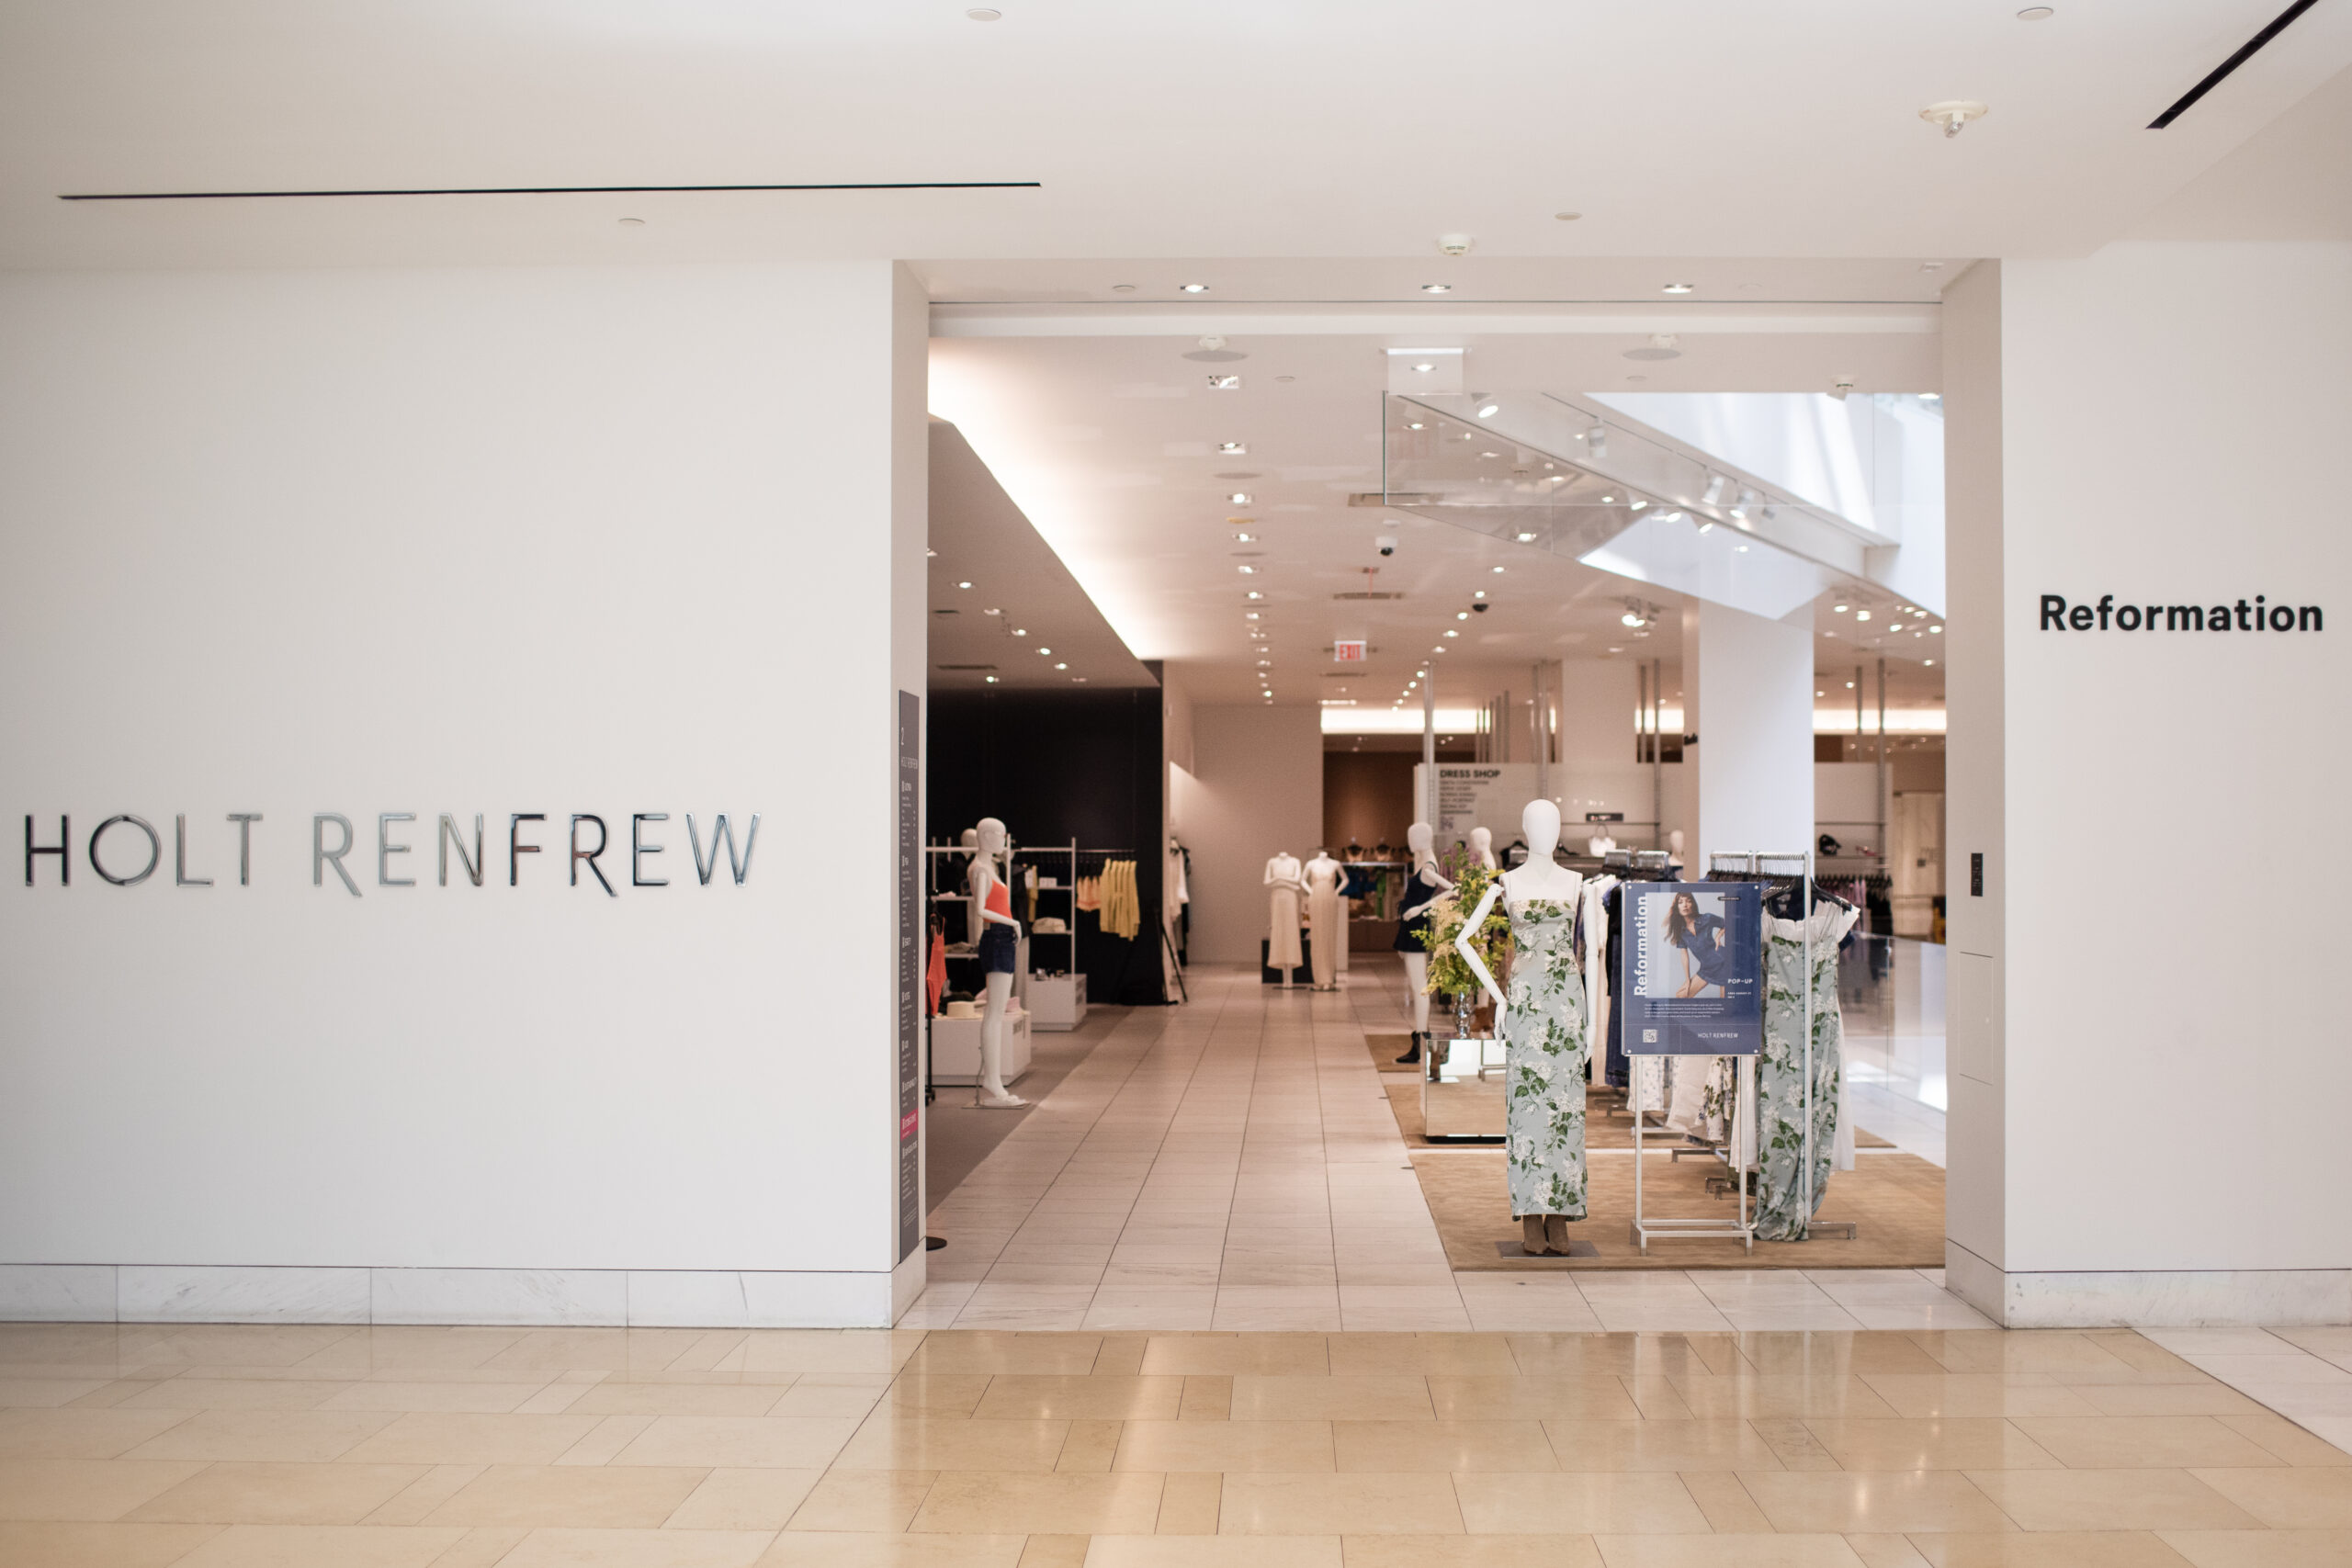 Reformation Opens Pop-Up at Holt Renfrew in Calgary to Test the Market